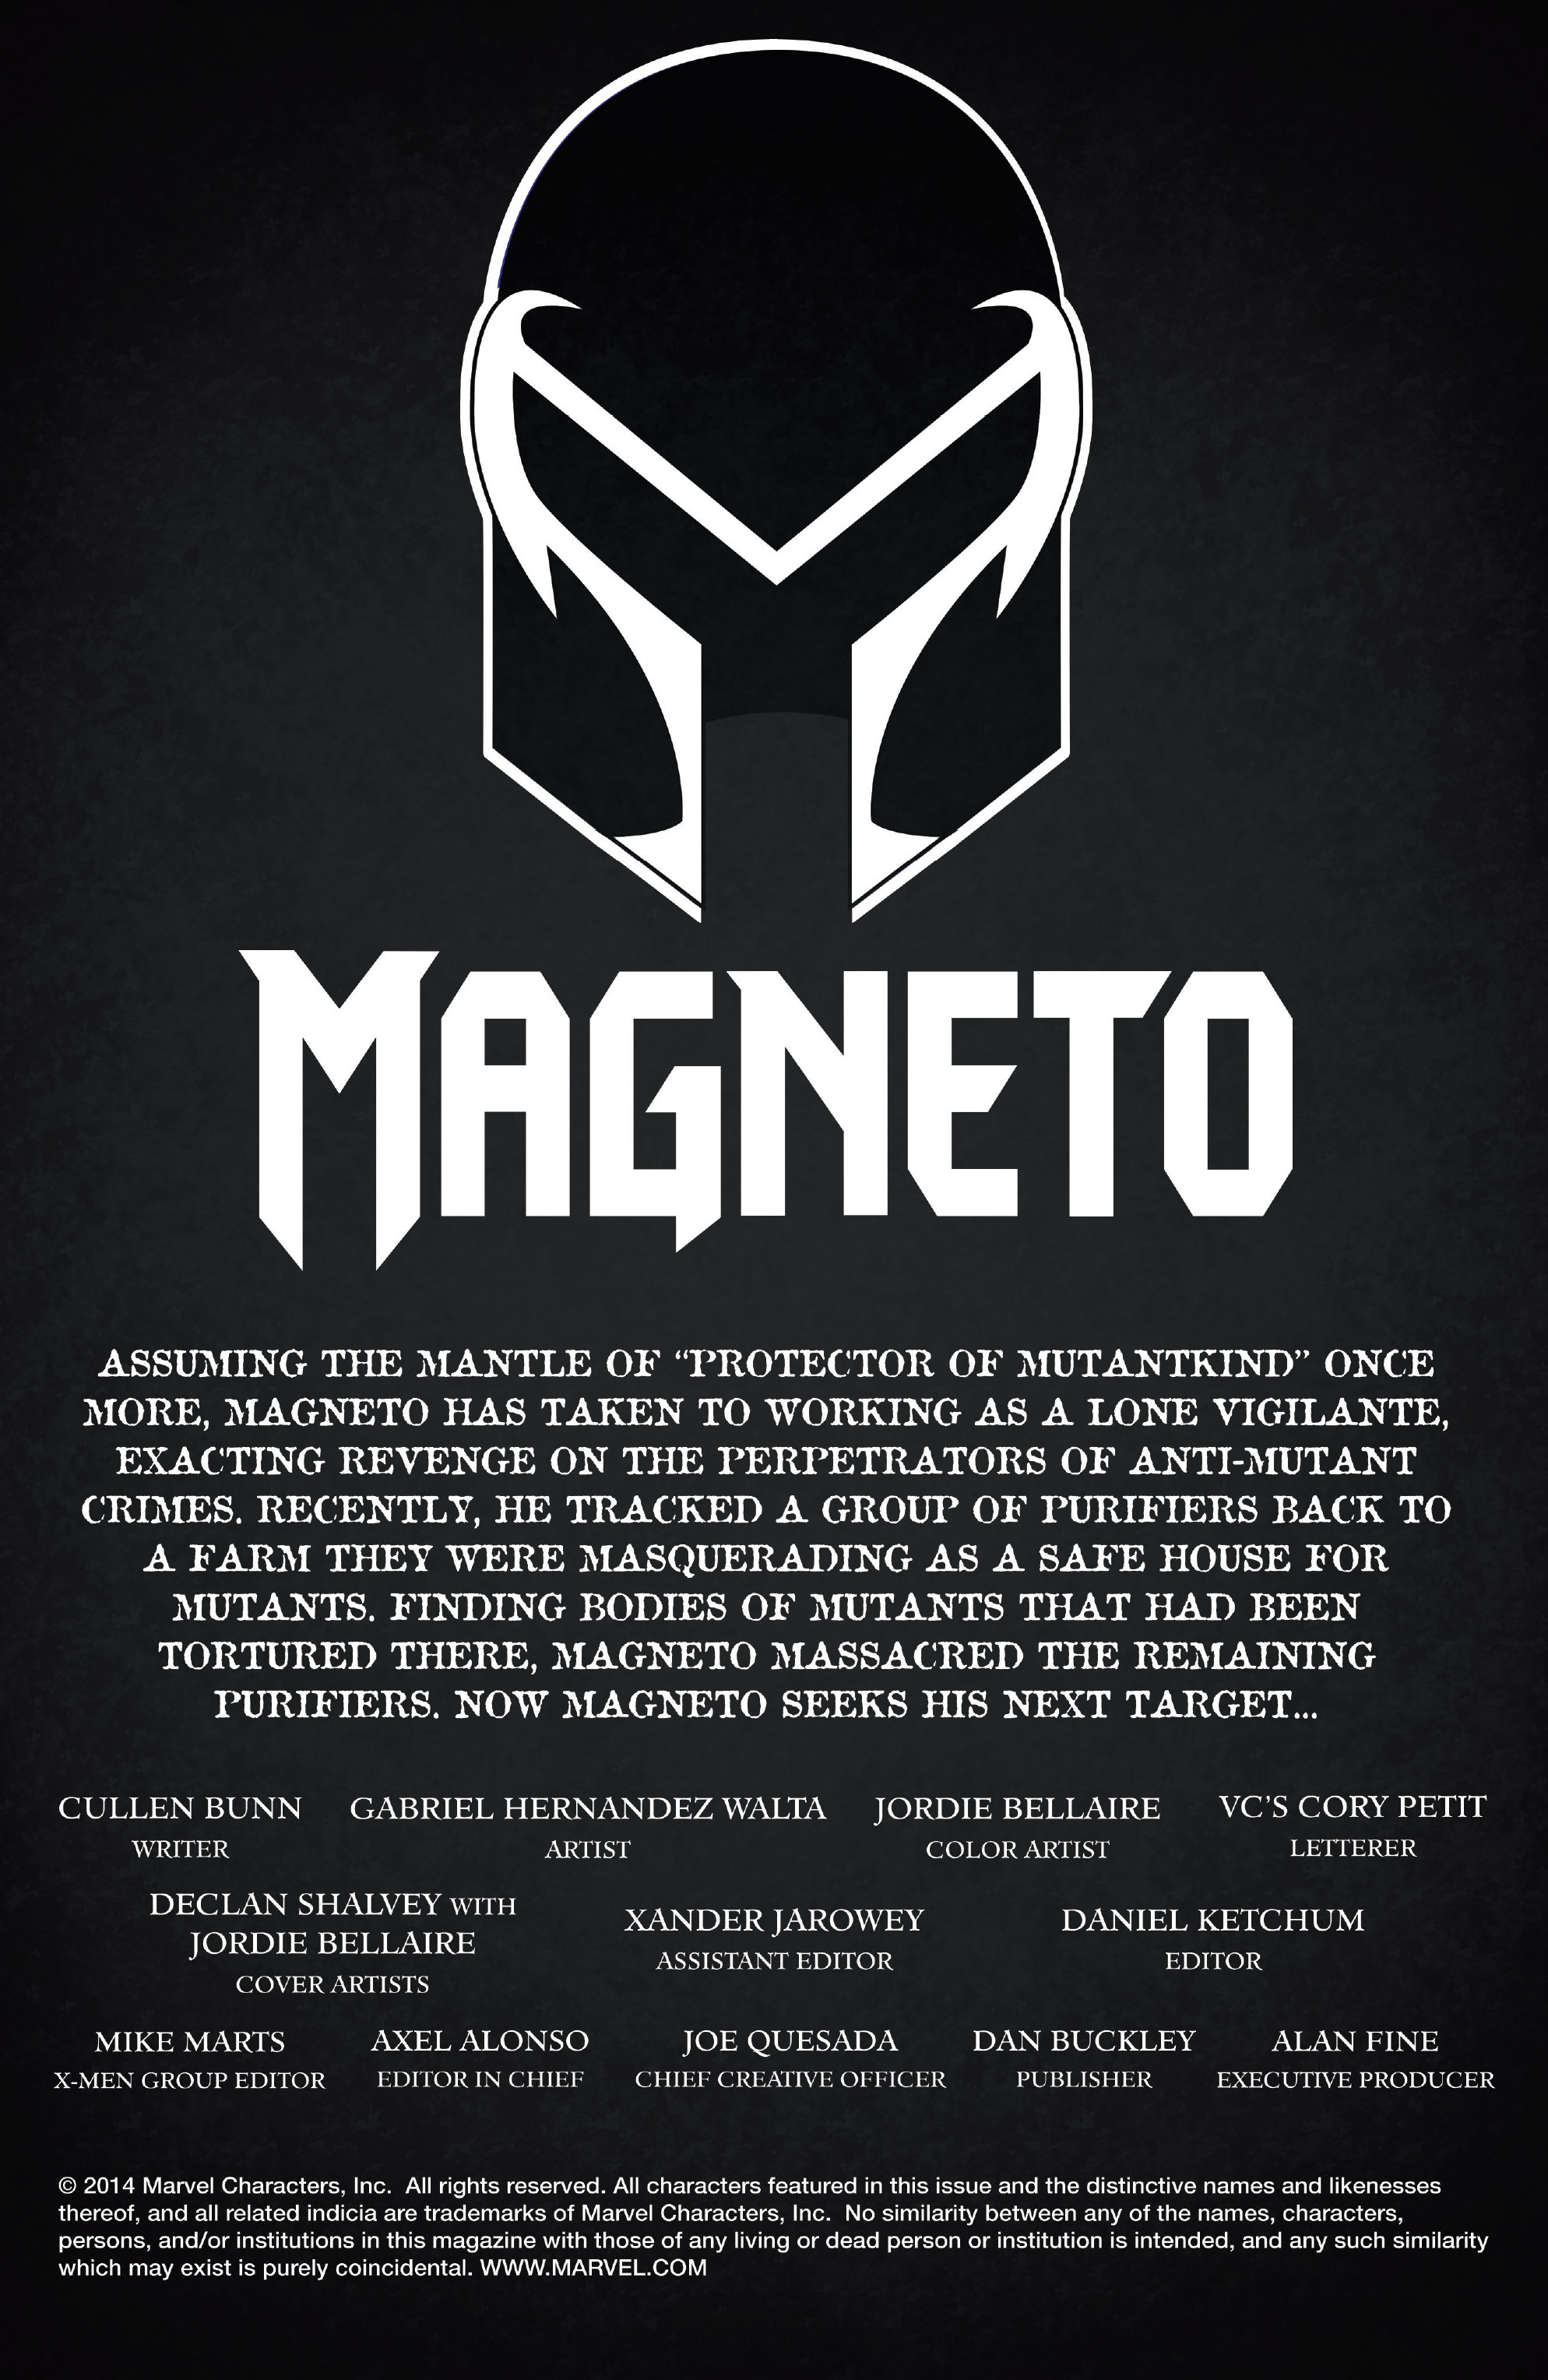 Read online Magneto comic -  Issue #5 - 2